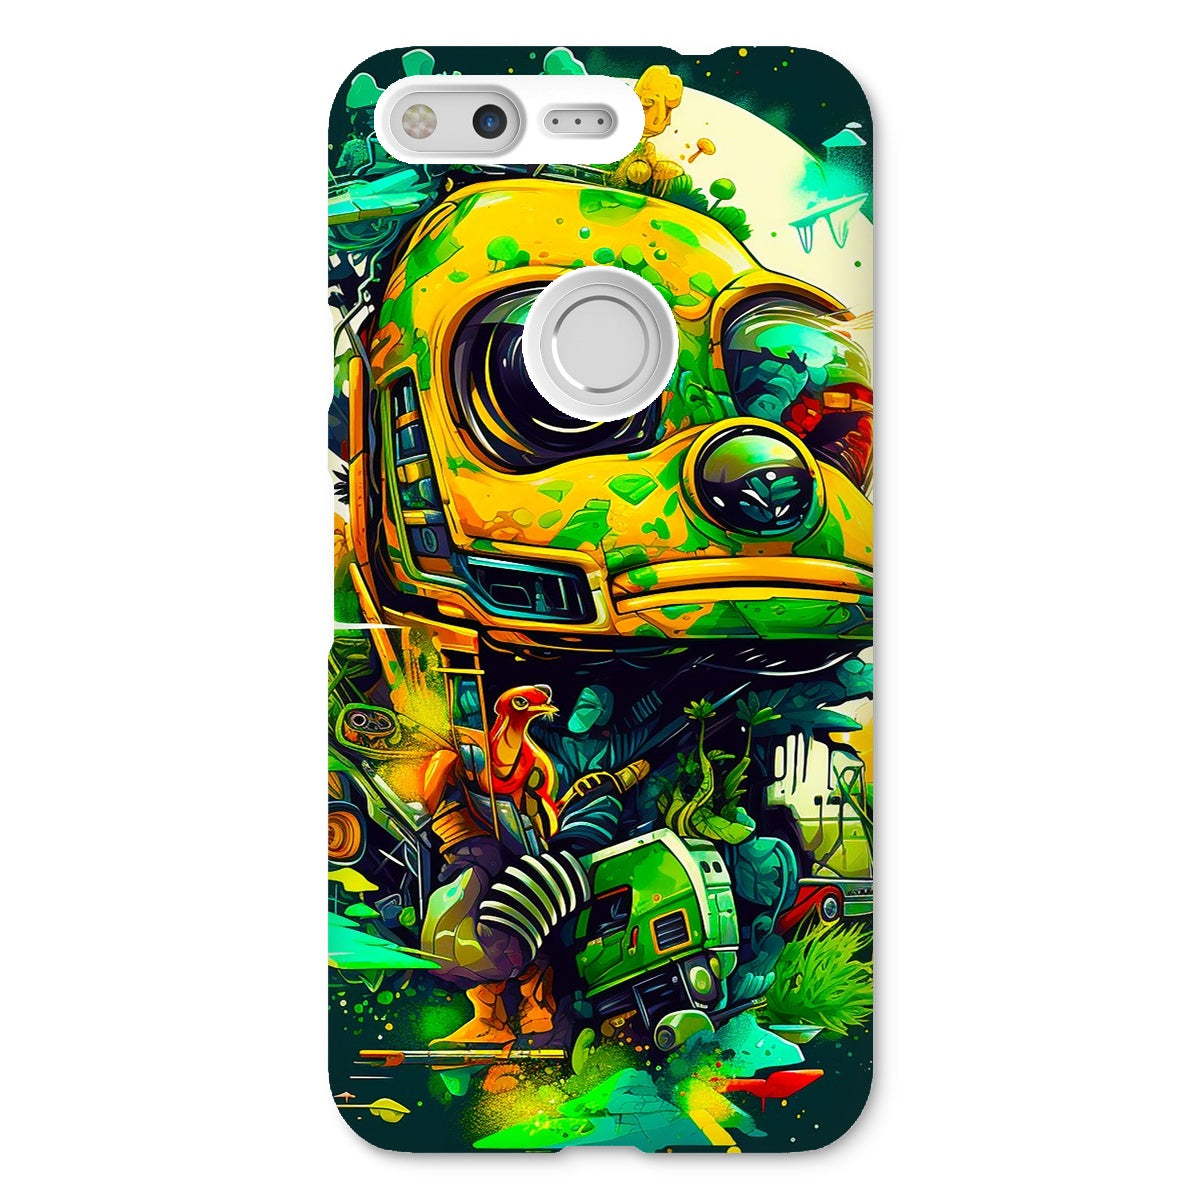 Mechanical Muse: Vibrant Graffiti Odyssey in Surreal Auto Wonderland Snap Phone Case